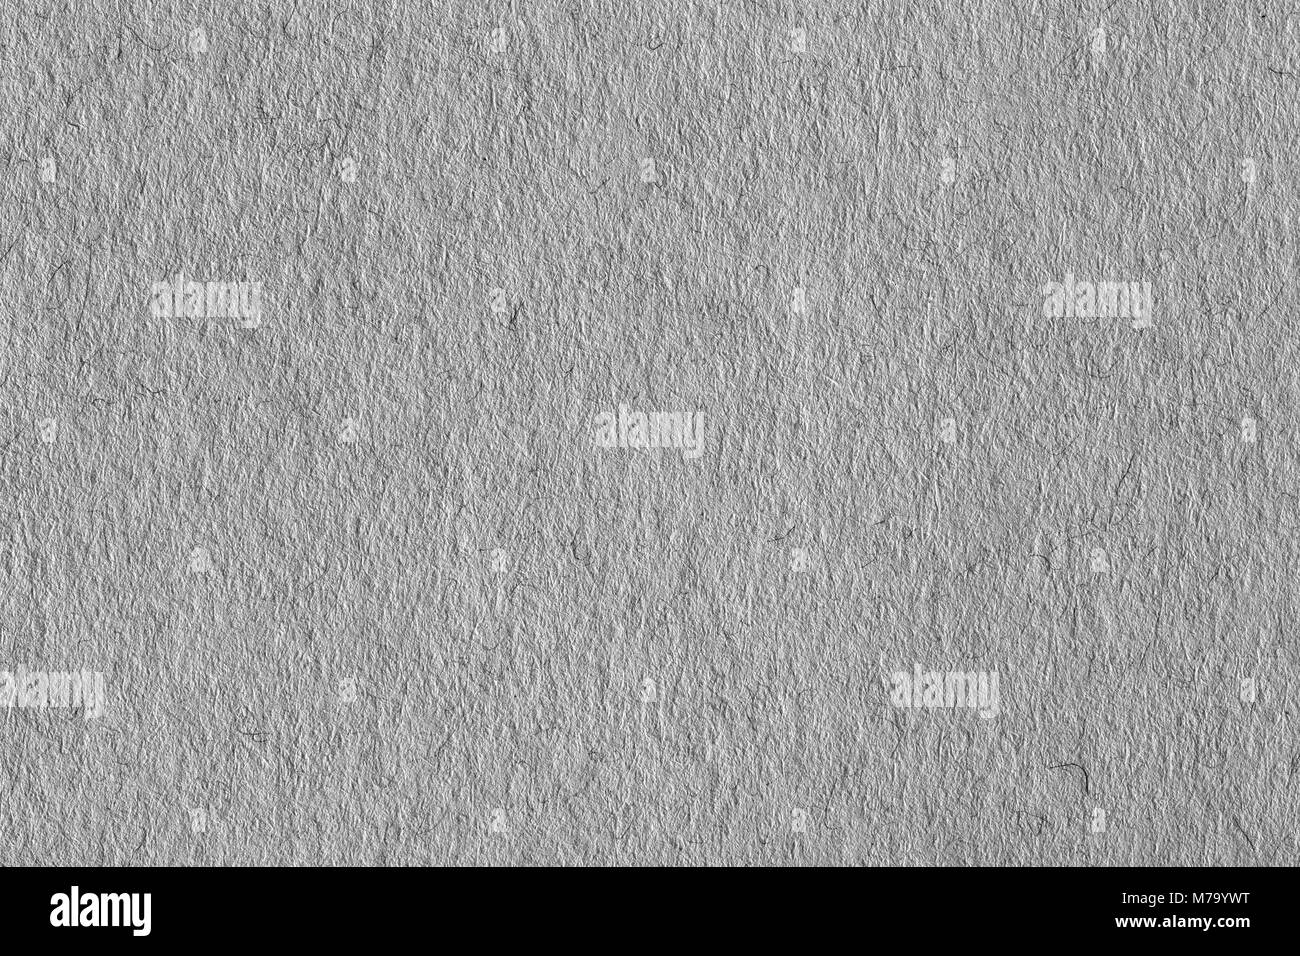 Grey paper texture. High resolution photo. Stock Photo